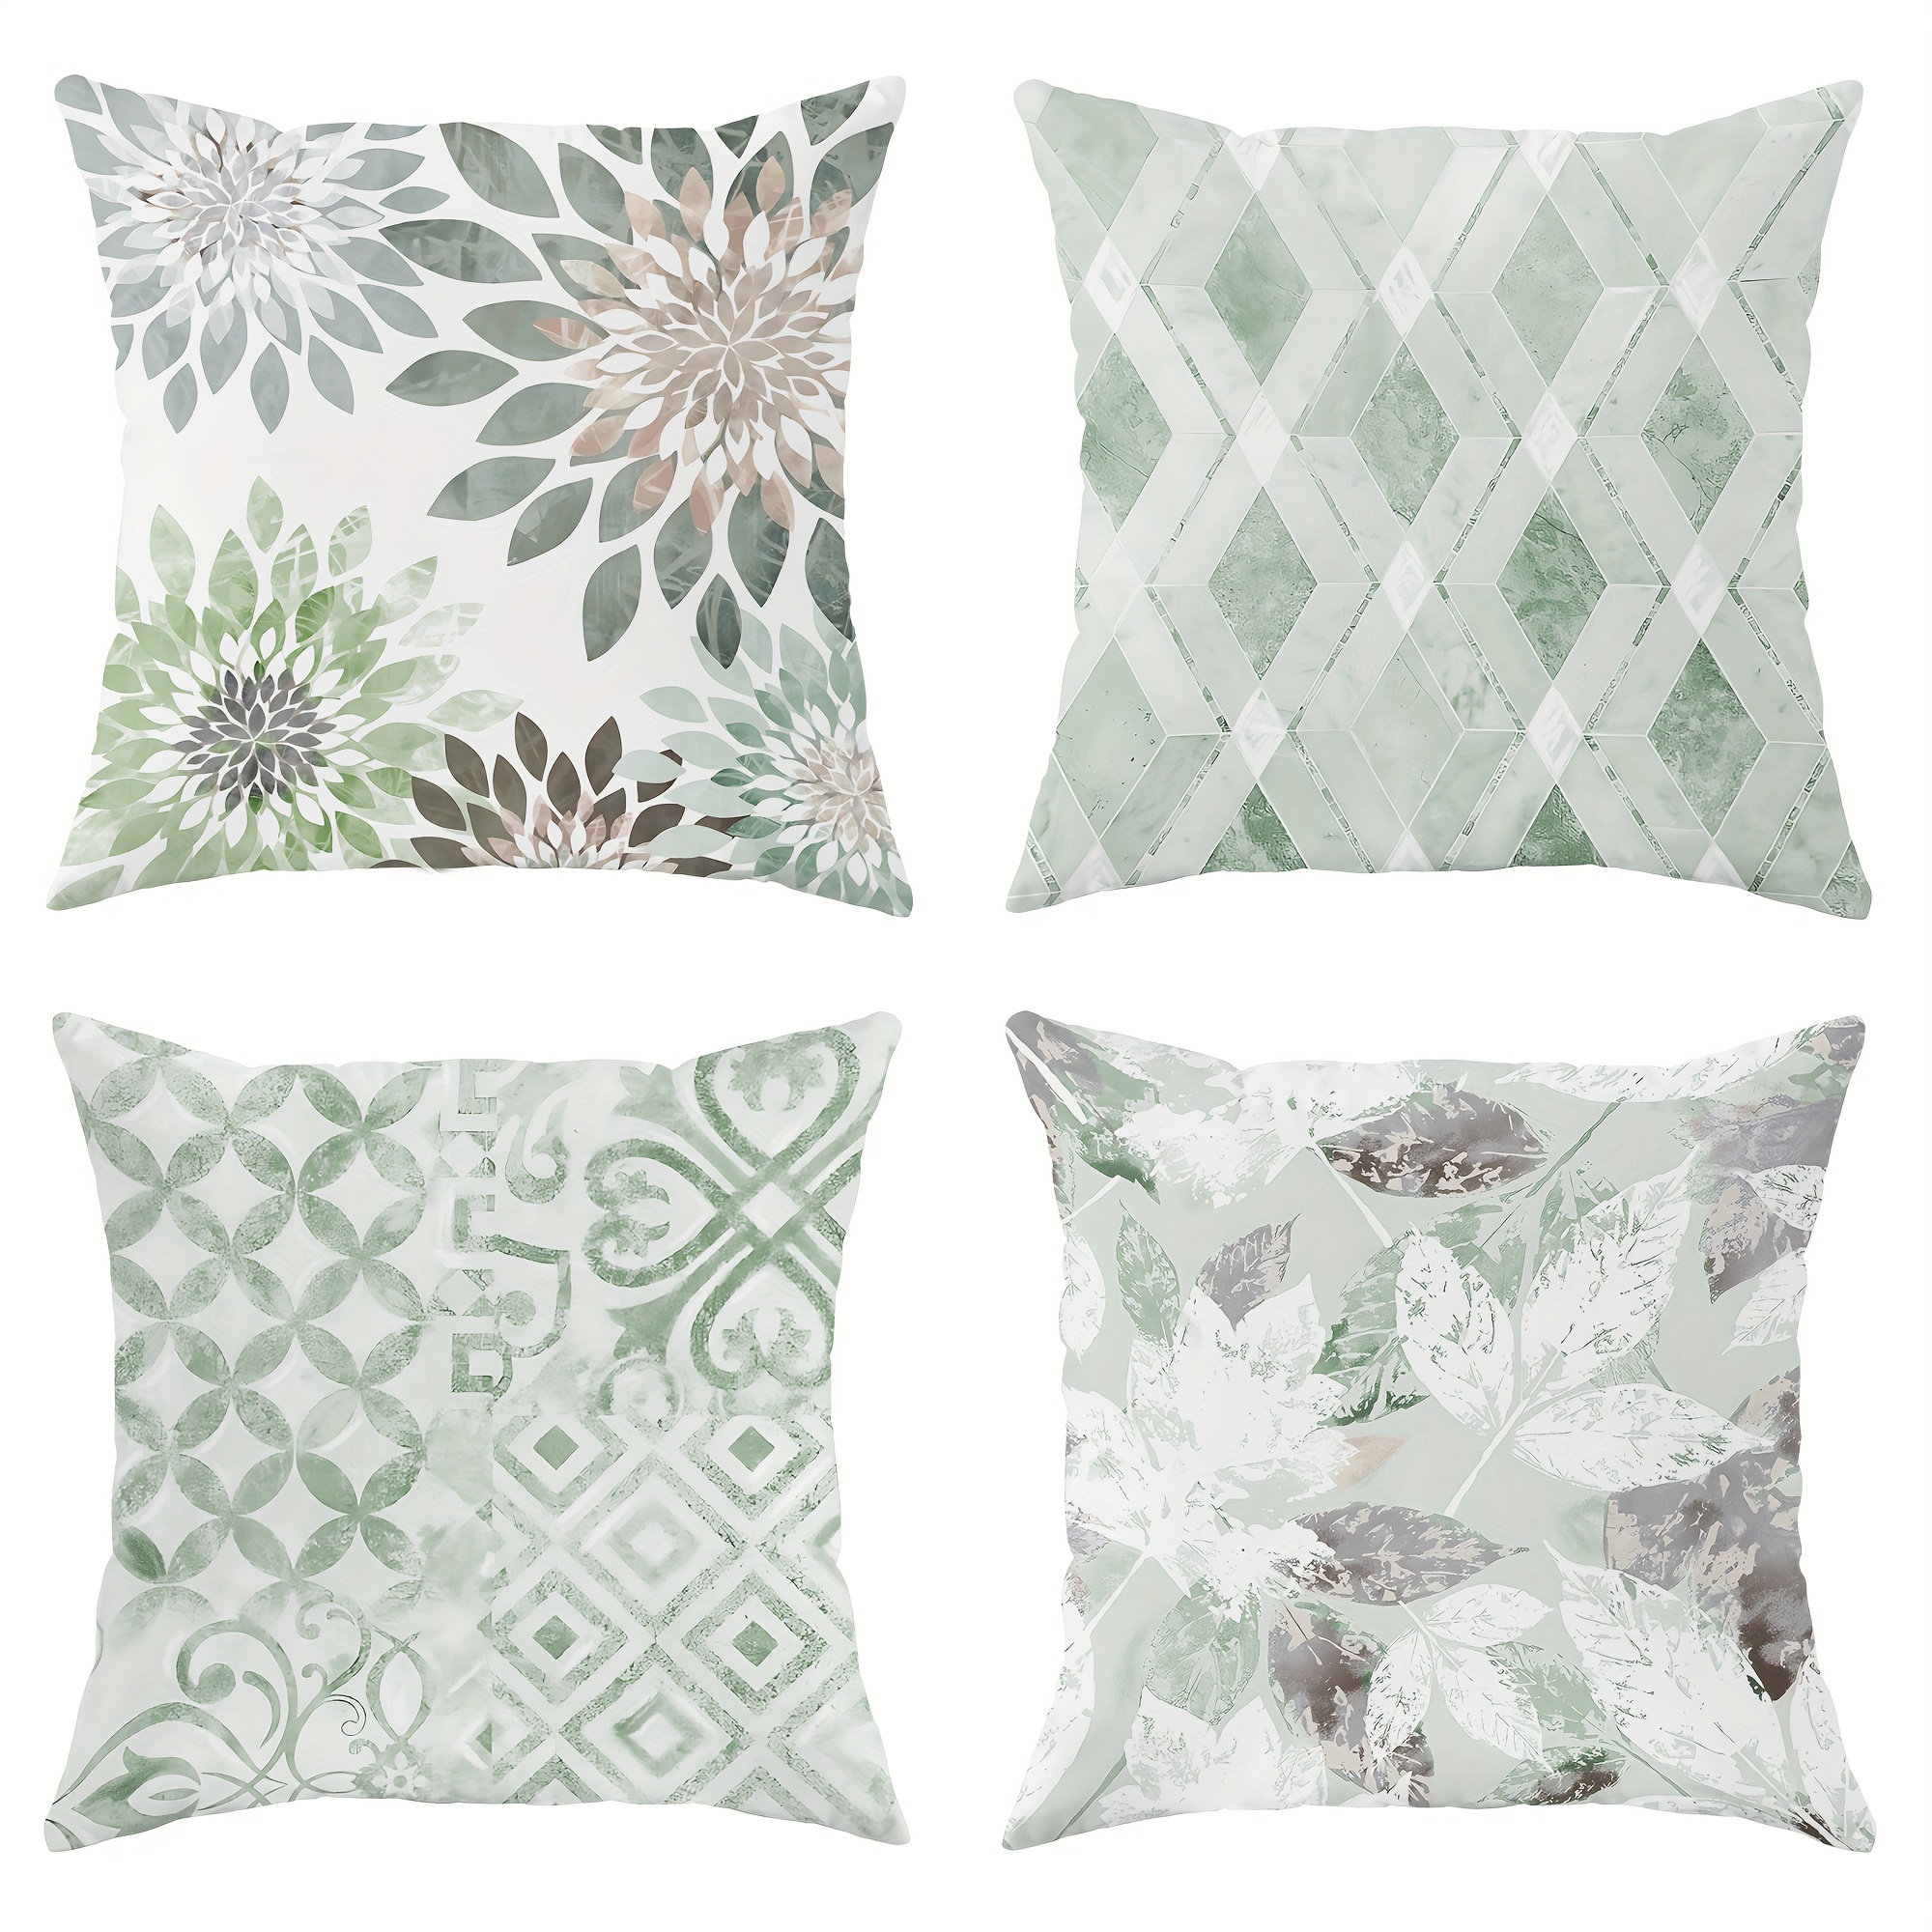 

4pcs, Floral Geometric Leaf Plant Light Green Polyester Throw Pillow Covers, Modern Abstract Pillow Covers, Decorative Cushion Covers 45×45cm/18 "x18" For Living Room Bedroom Sofa Bed Decoration